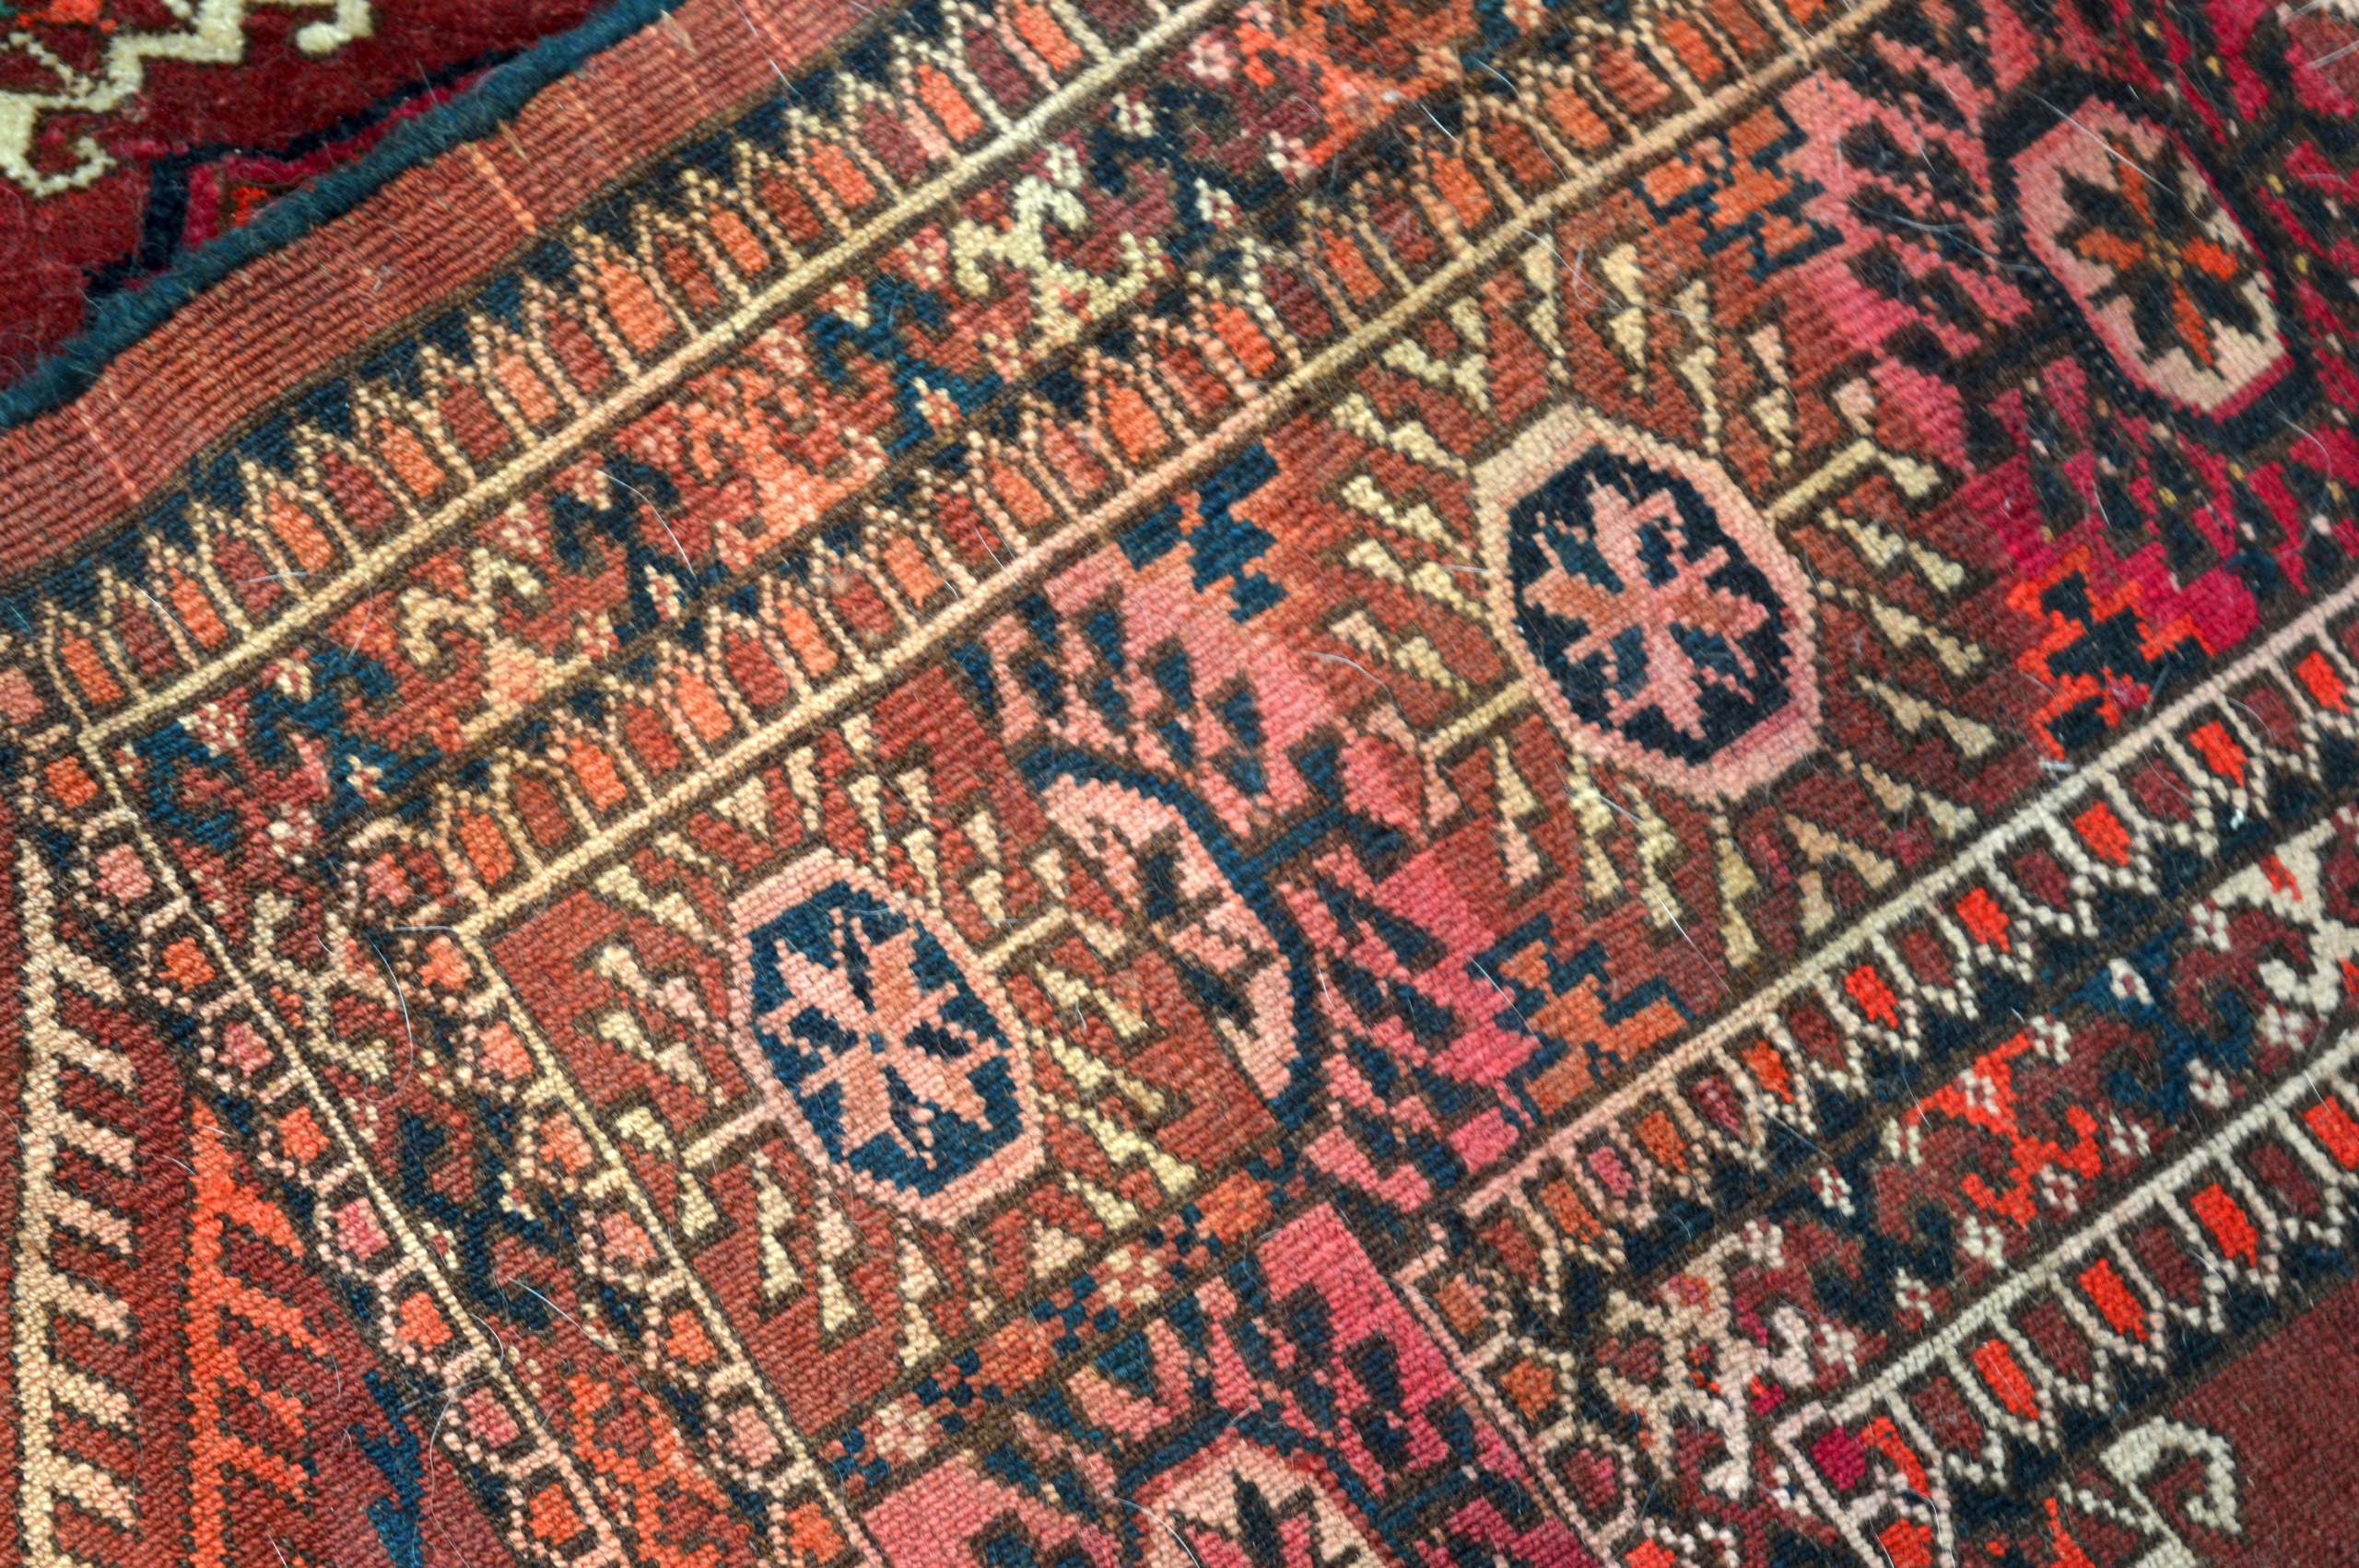 A RED GROUND PERSIAN RUG decorated with medallions within a floral border. 5Ft 10ins x 4ft 4ins. - Image 3 of 3